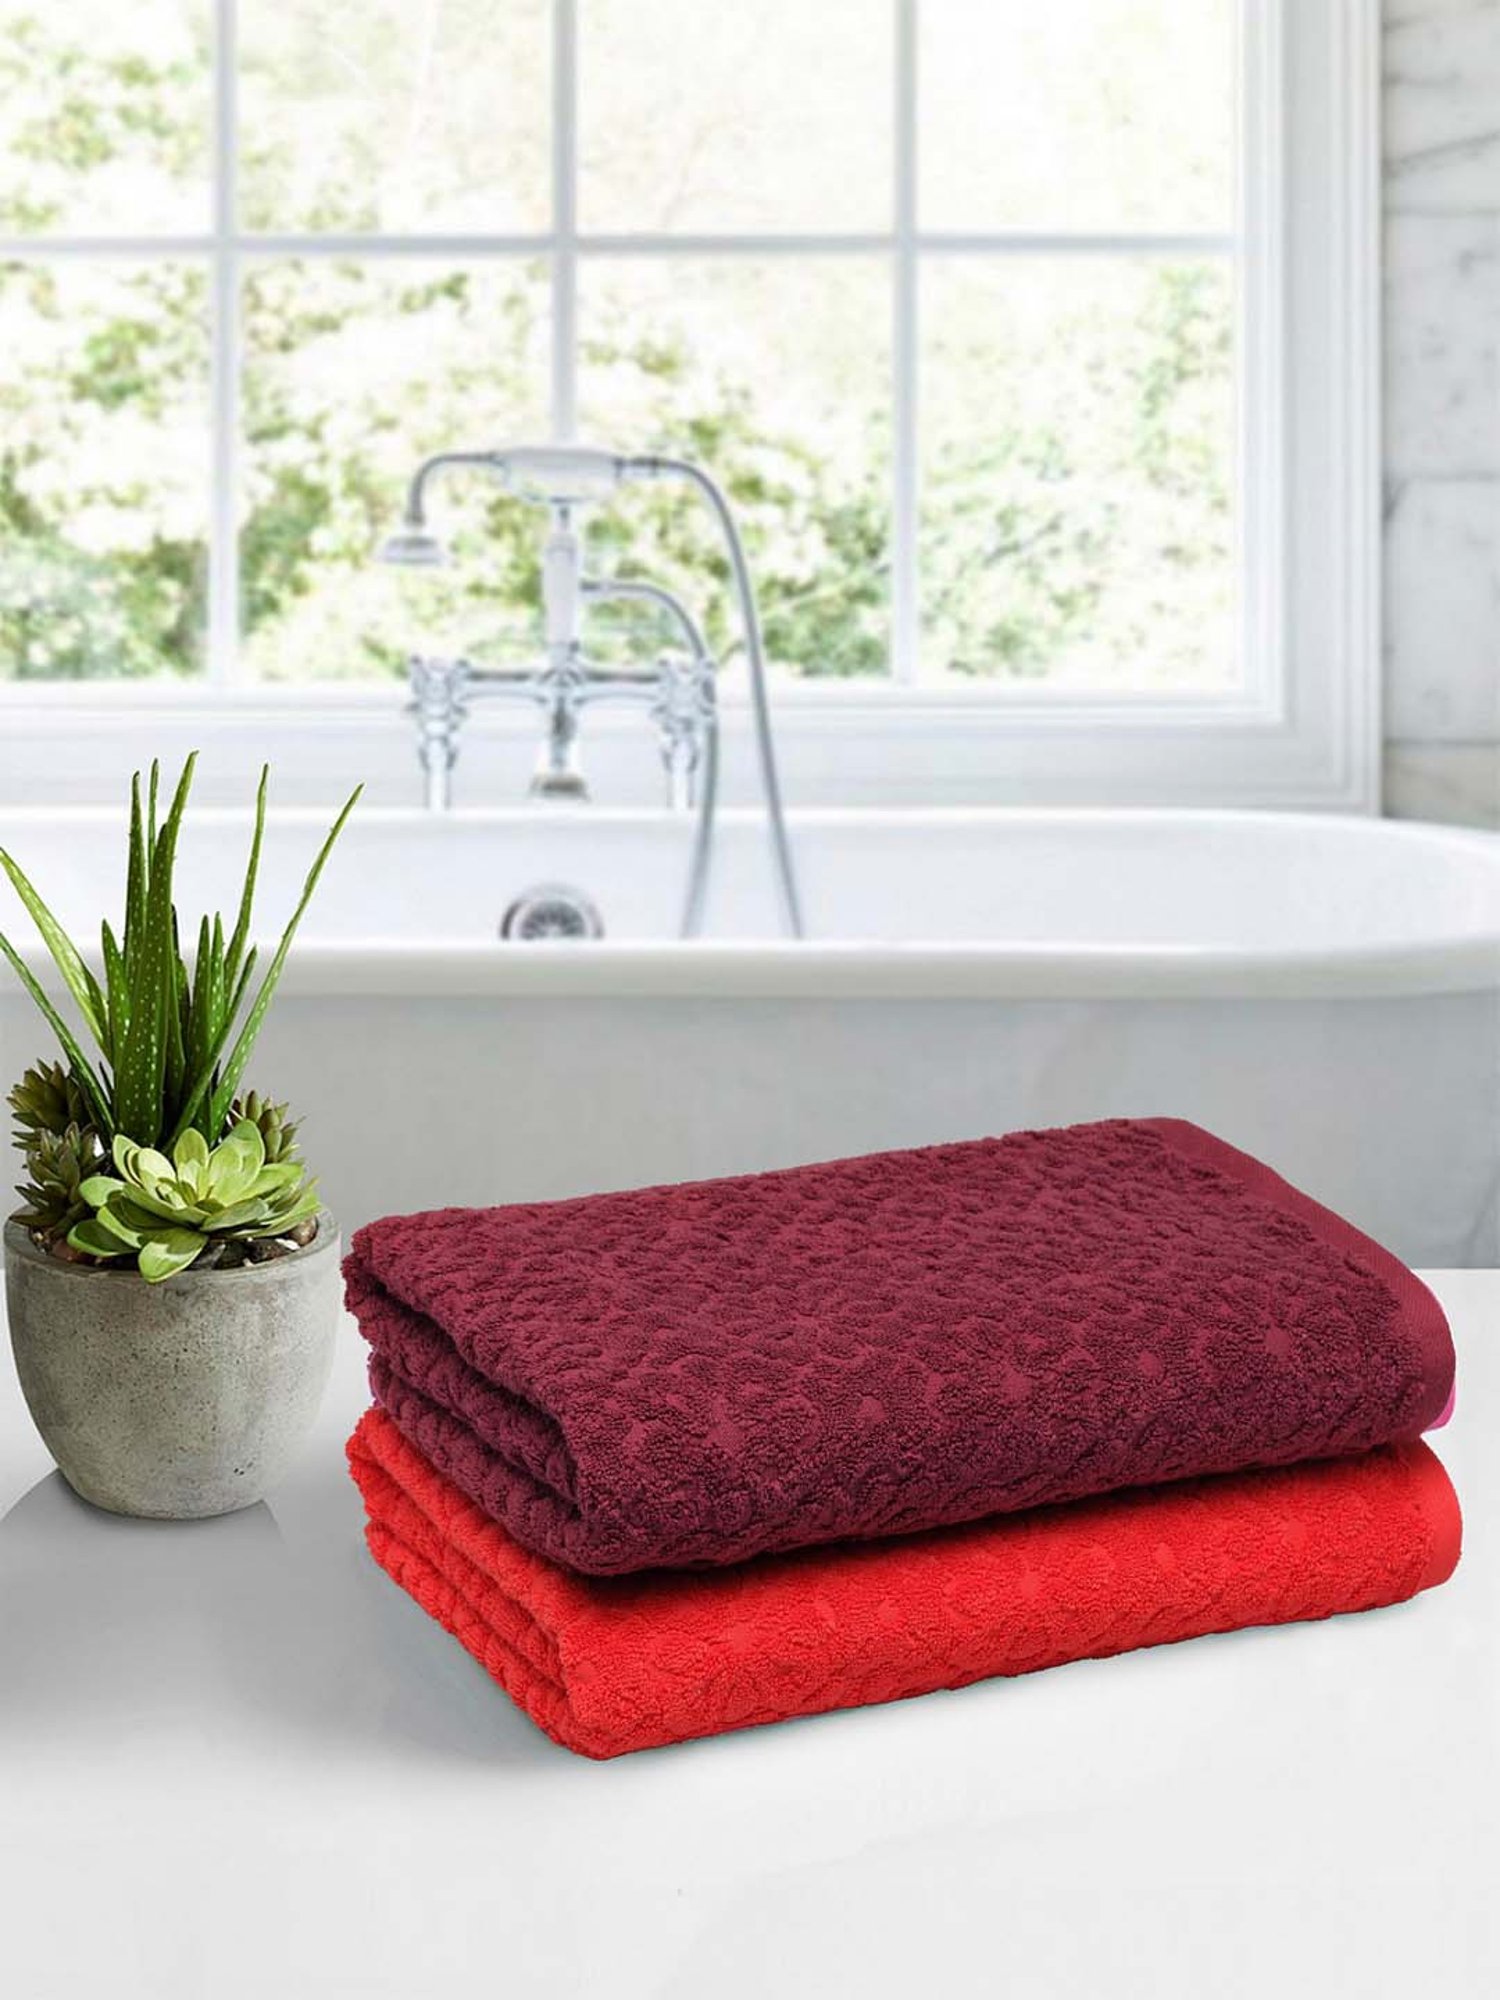 Trident Maroon Red Cotton 600 Gsm Bath Towel Set From Trident At Best Prices On Tata Cliq